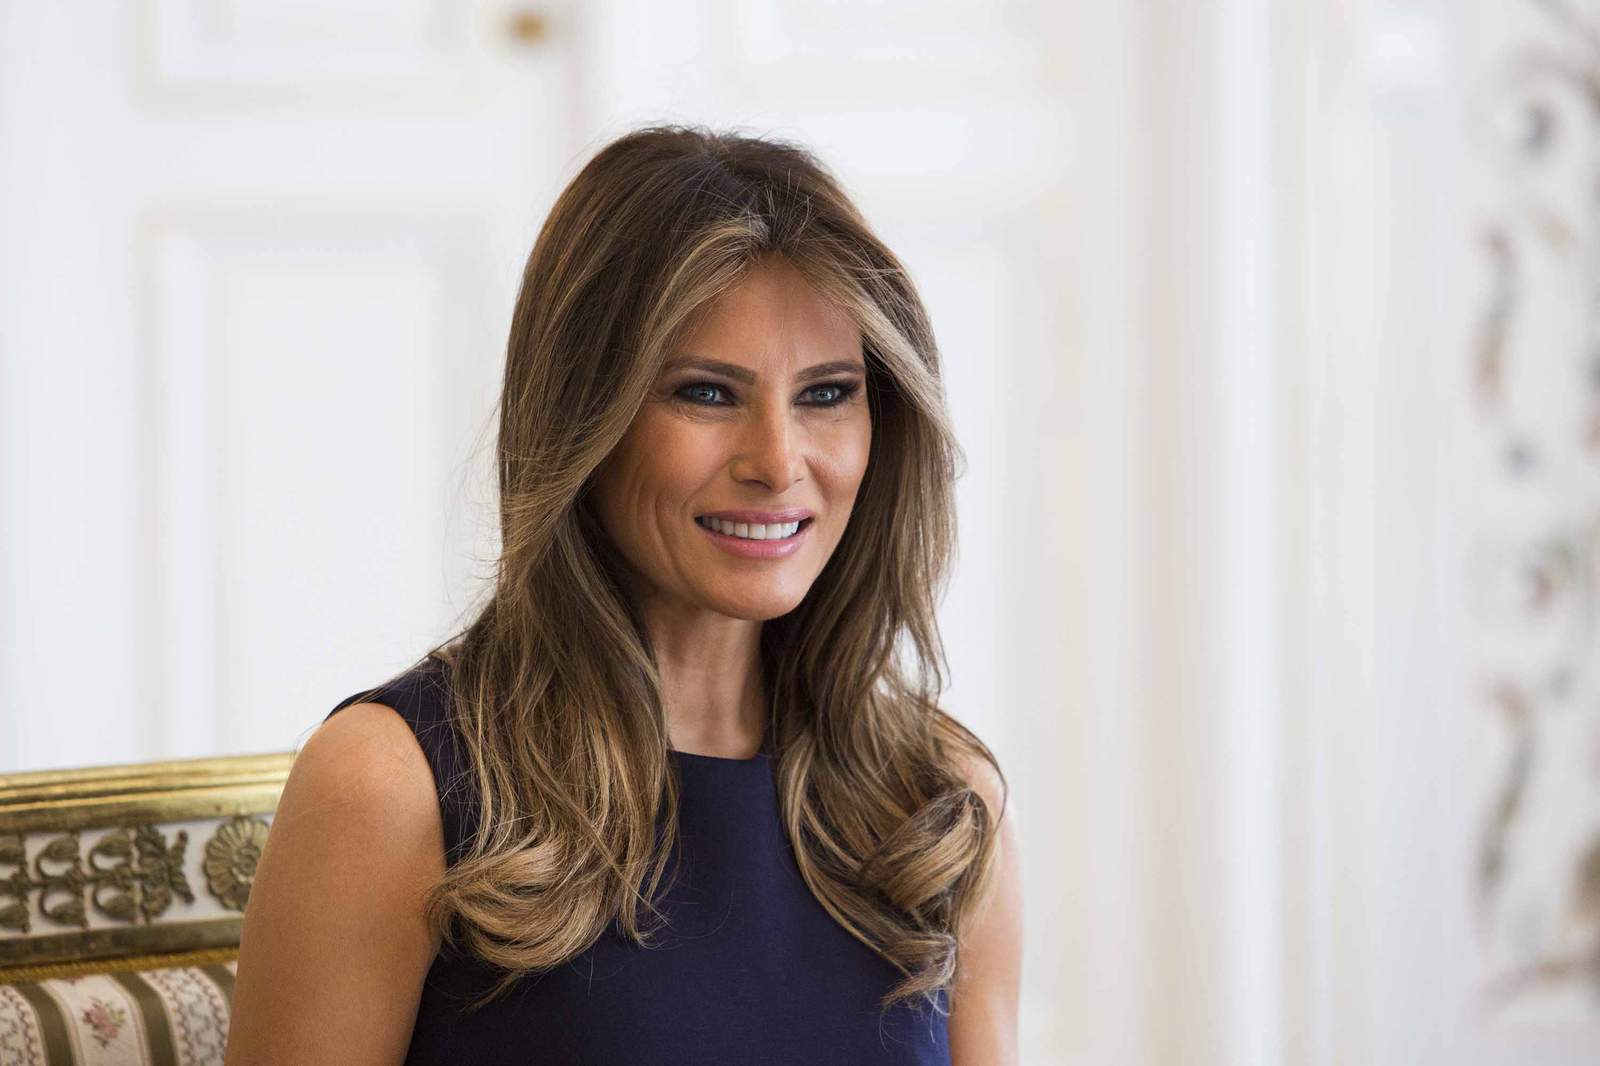 Melania Trump launches childrens art project on 100th anniversary of womens right to vote